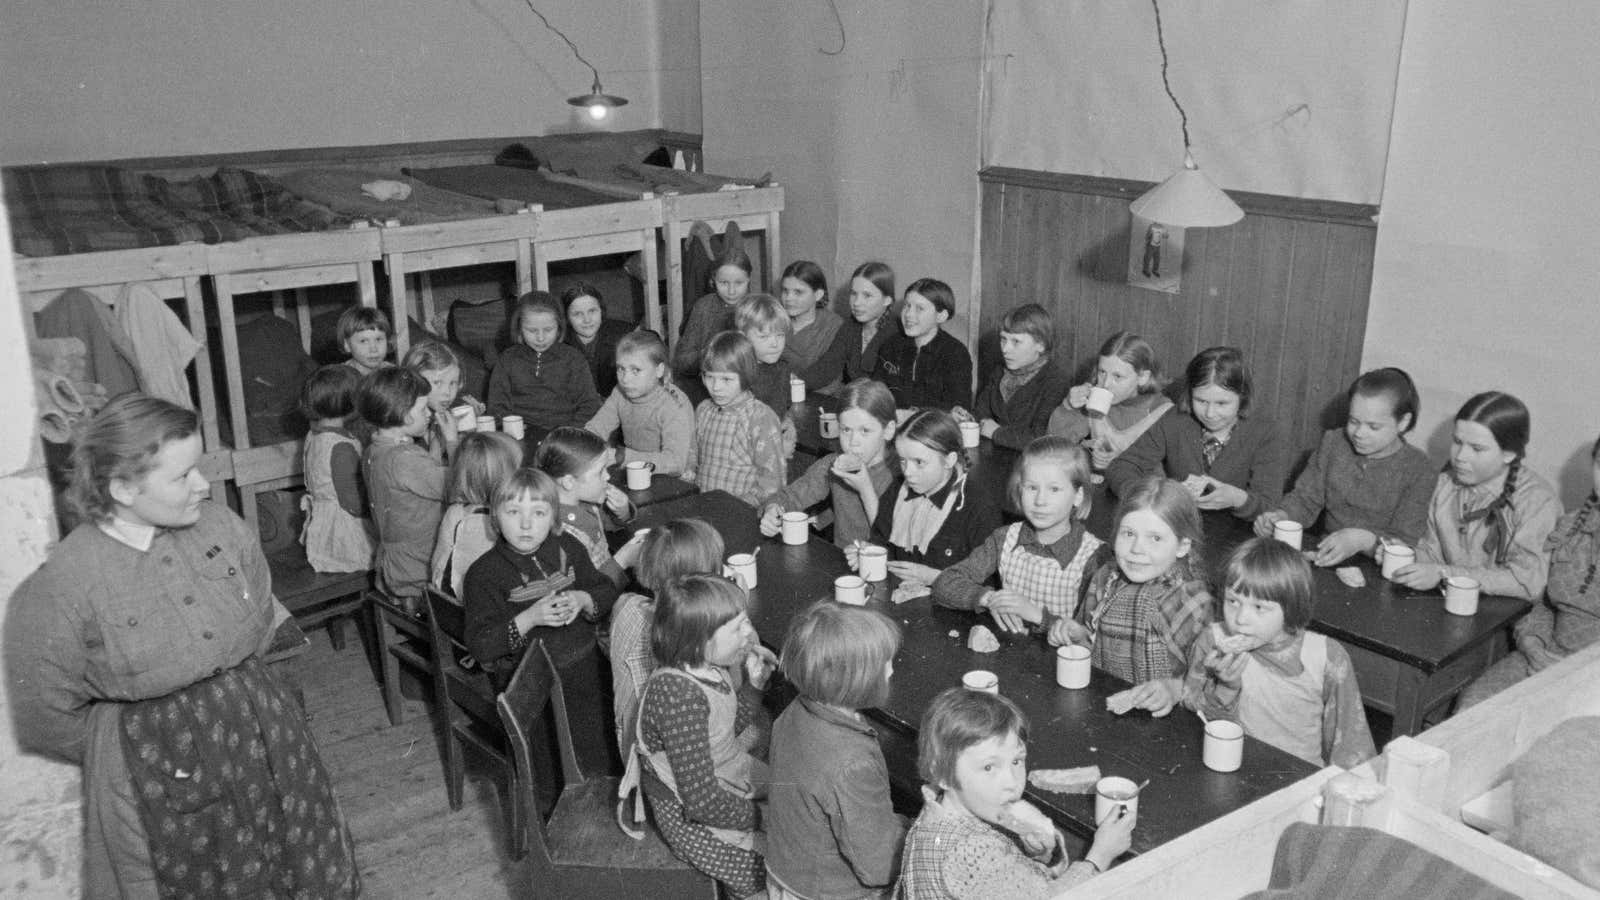 Children at a Finnish reform school, photographed in 1942.